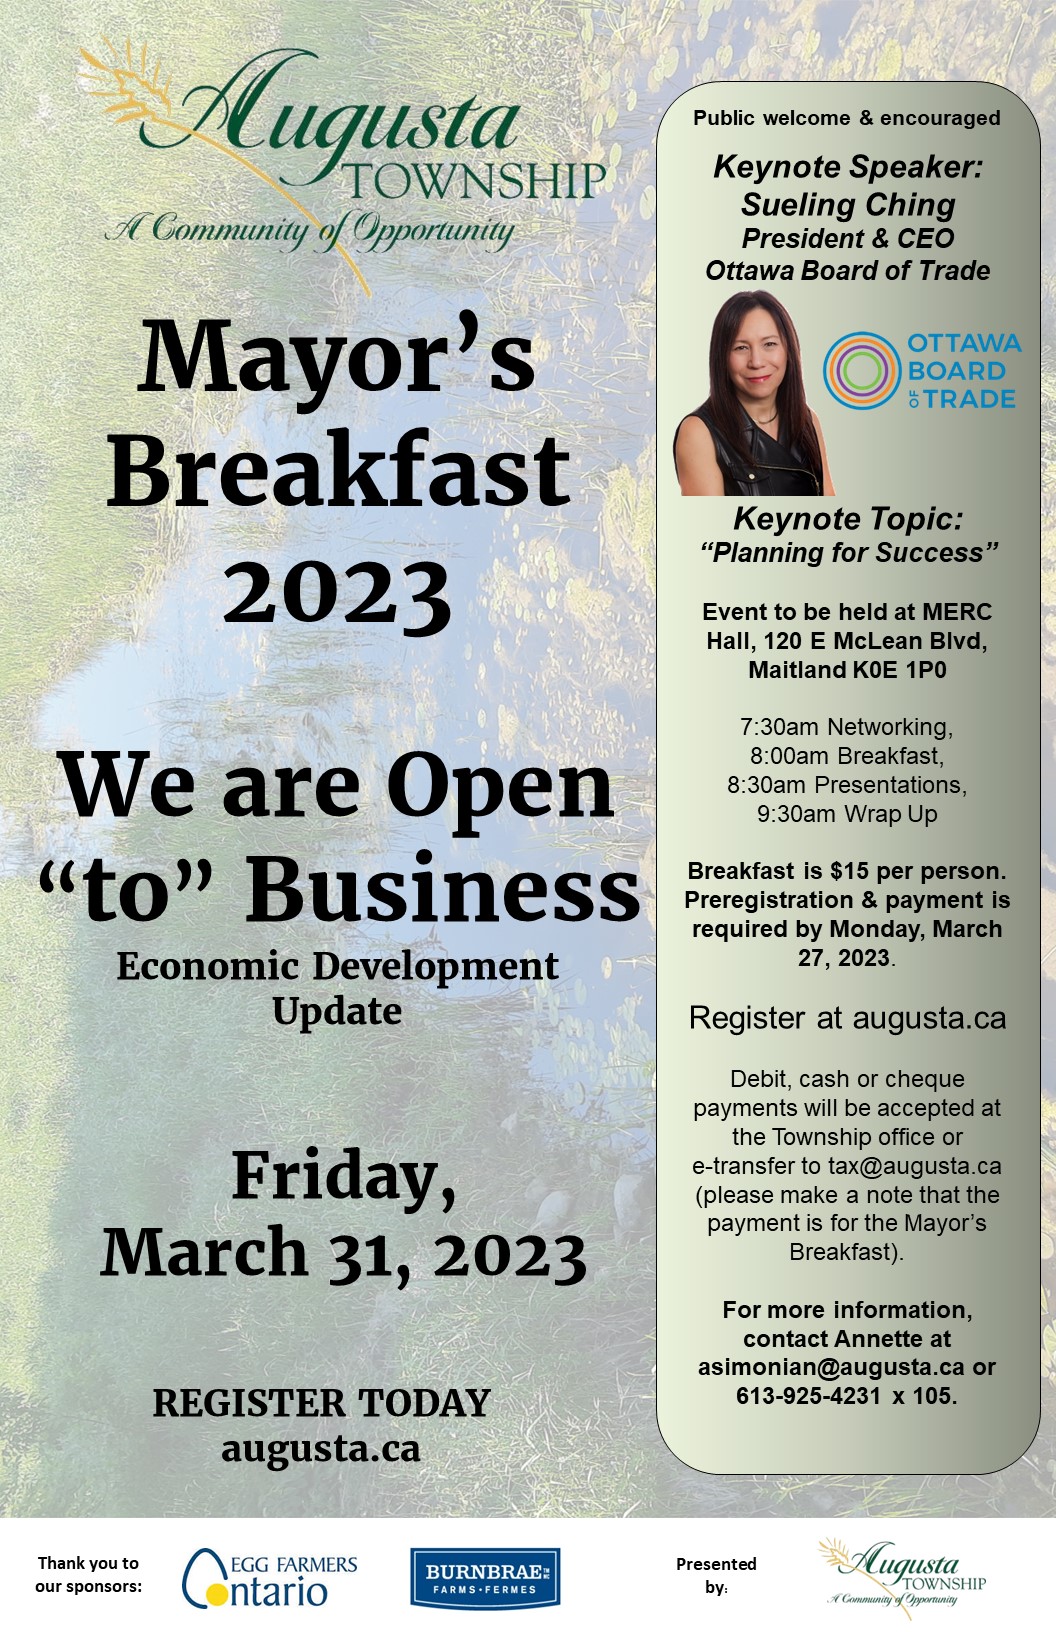 poster advertising the Mayor's Breakfast on March 31, 2023.